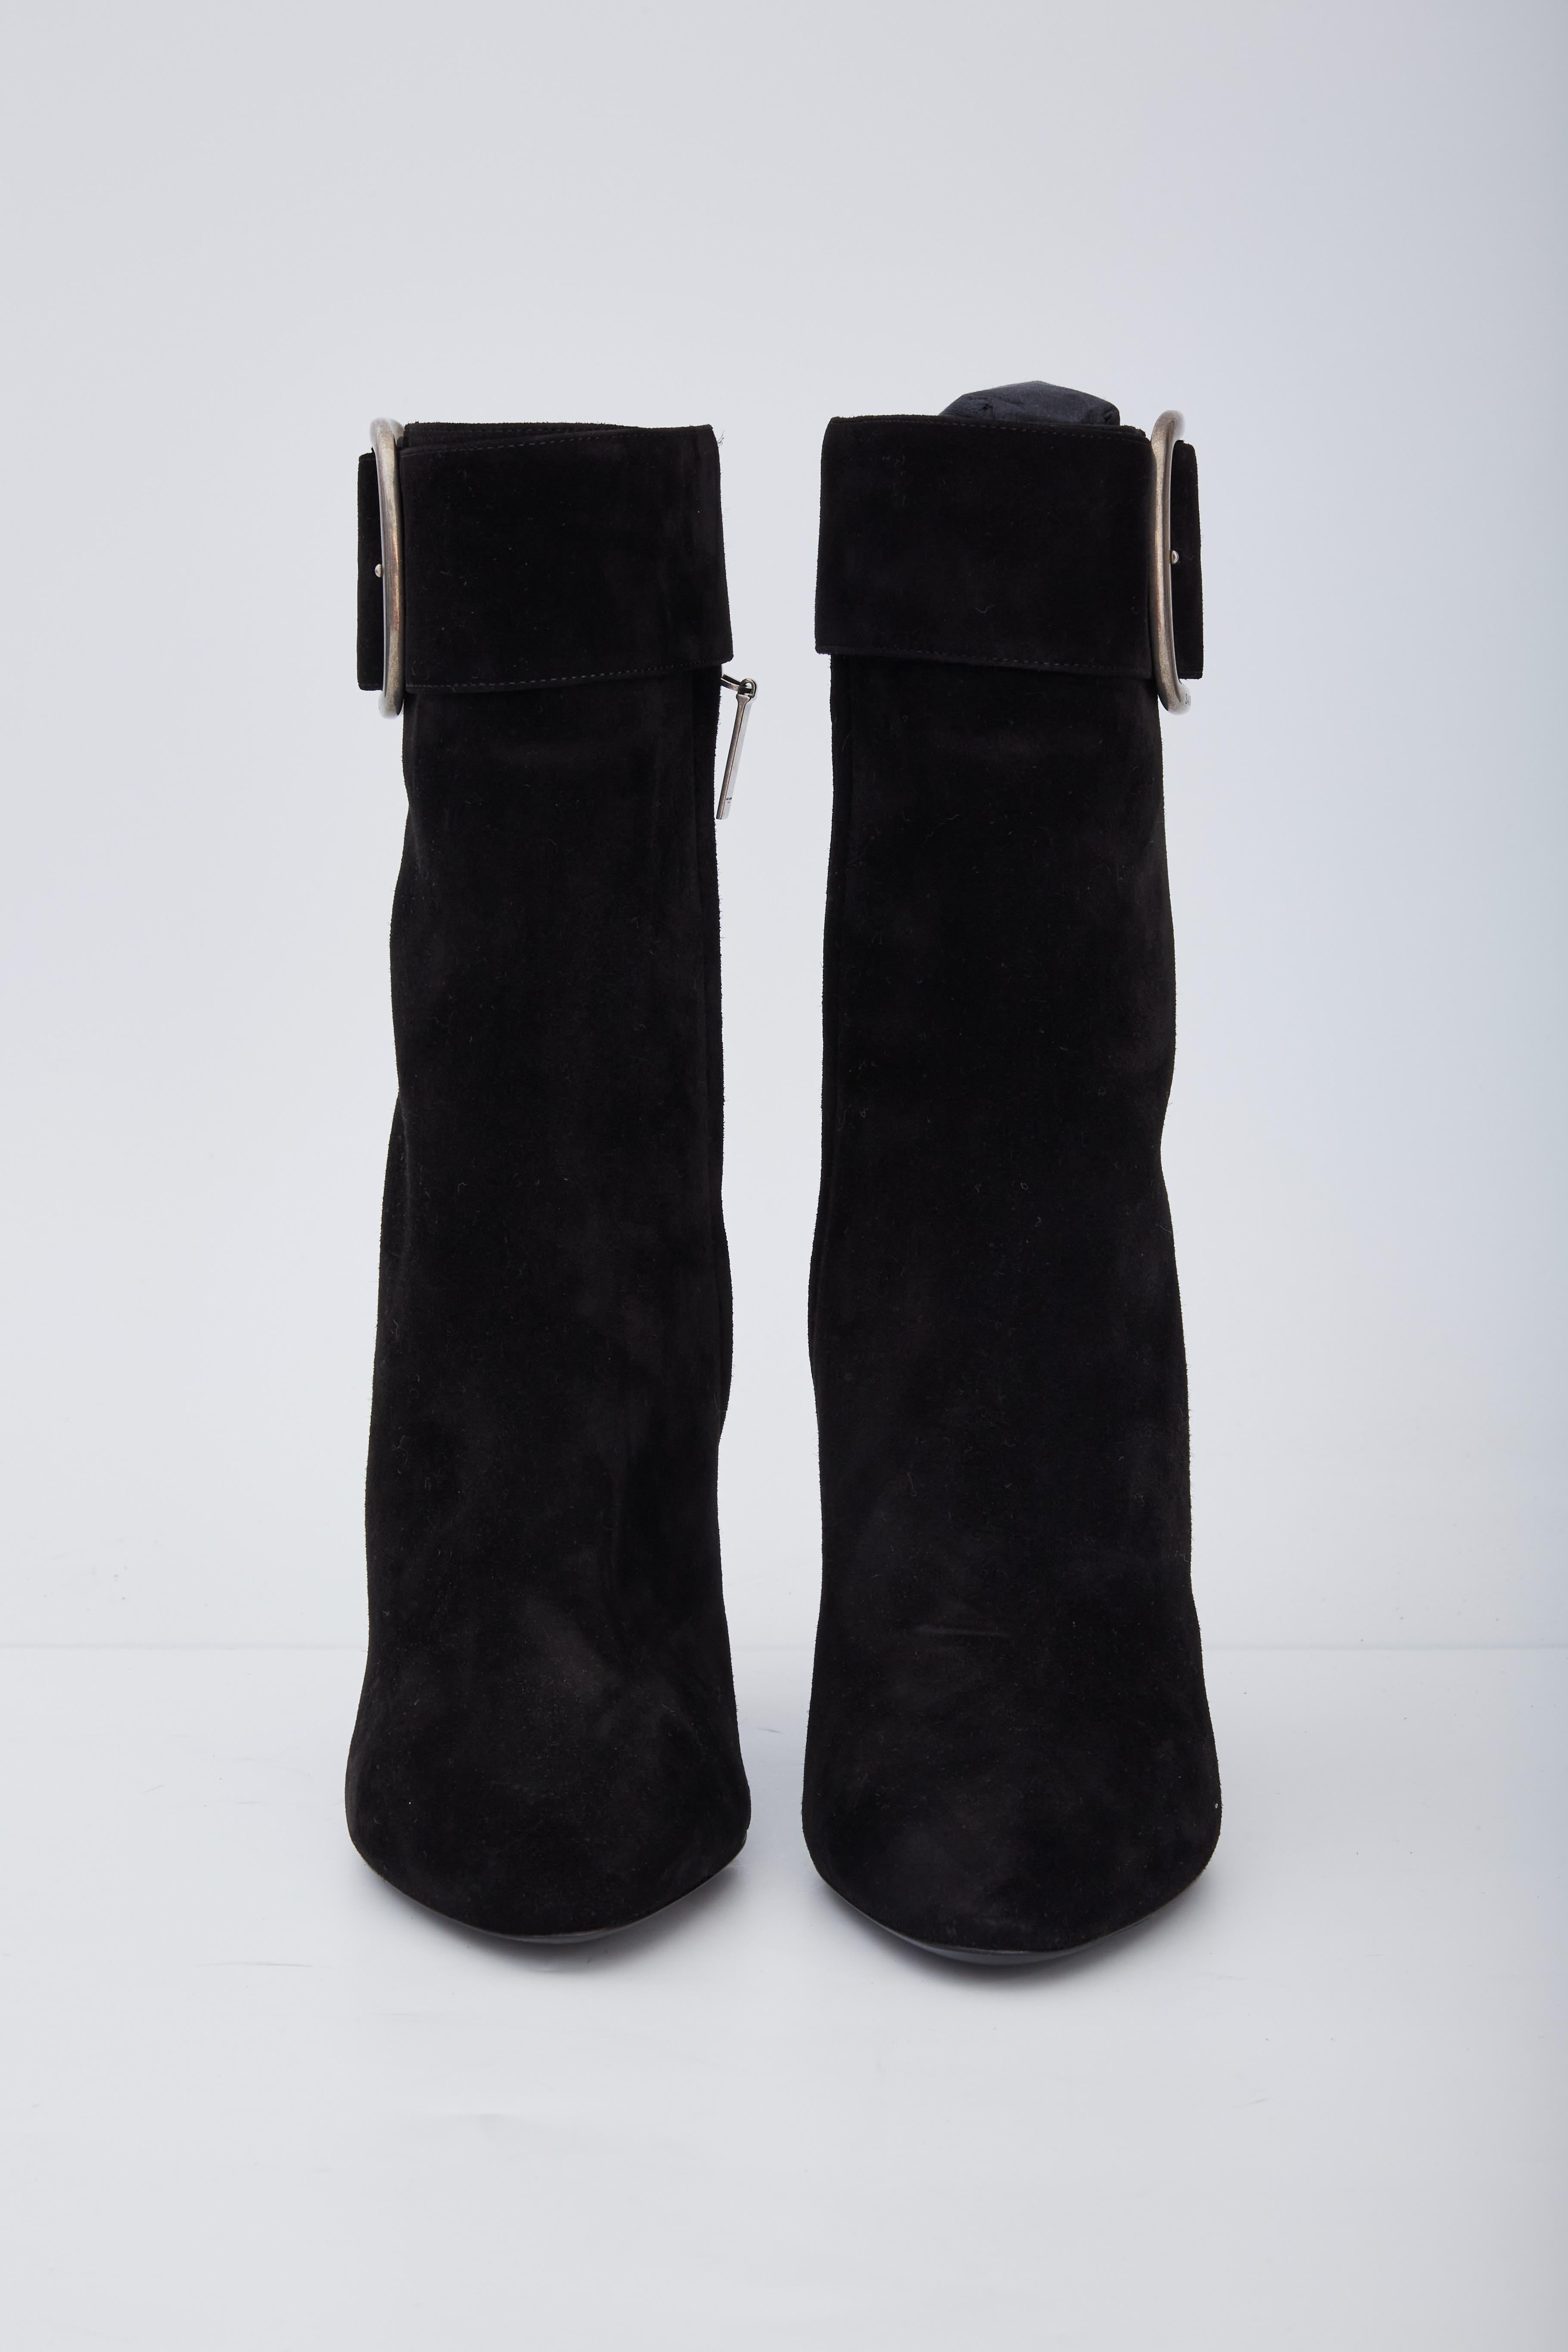 These boots are made of Joplin calfskin suede leather in black. The boots feature a wrap-around leather strap with an aged silver buckle, a pointed toe, and a 4-inch block heel.

COLOR: Black
MATERIAL: Suede
ITEM CODE: 529331
SIZE: 39 EU / 8 US
HEEL